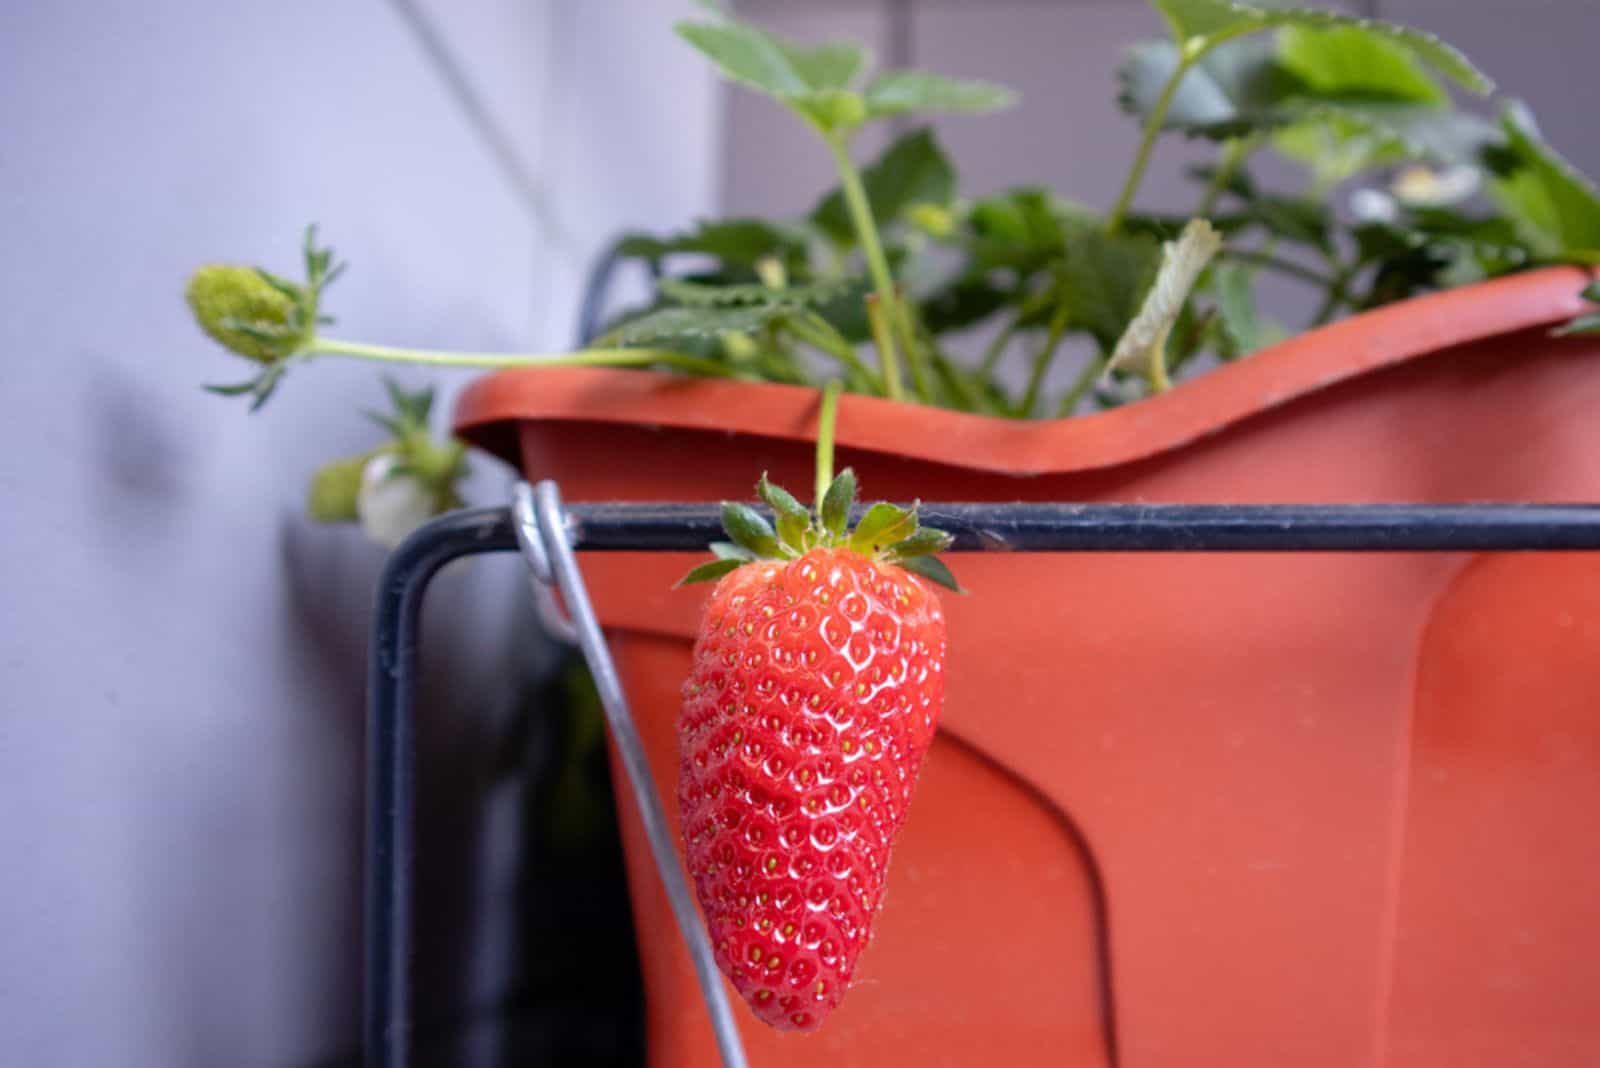 Strawberries are grown in a bucket